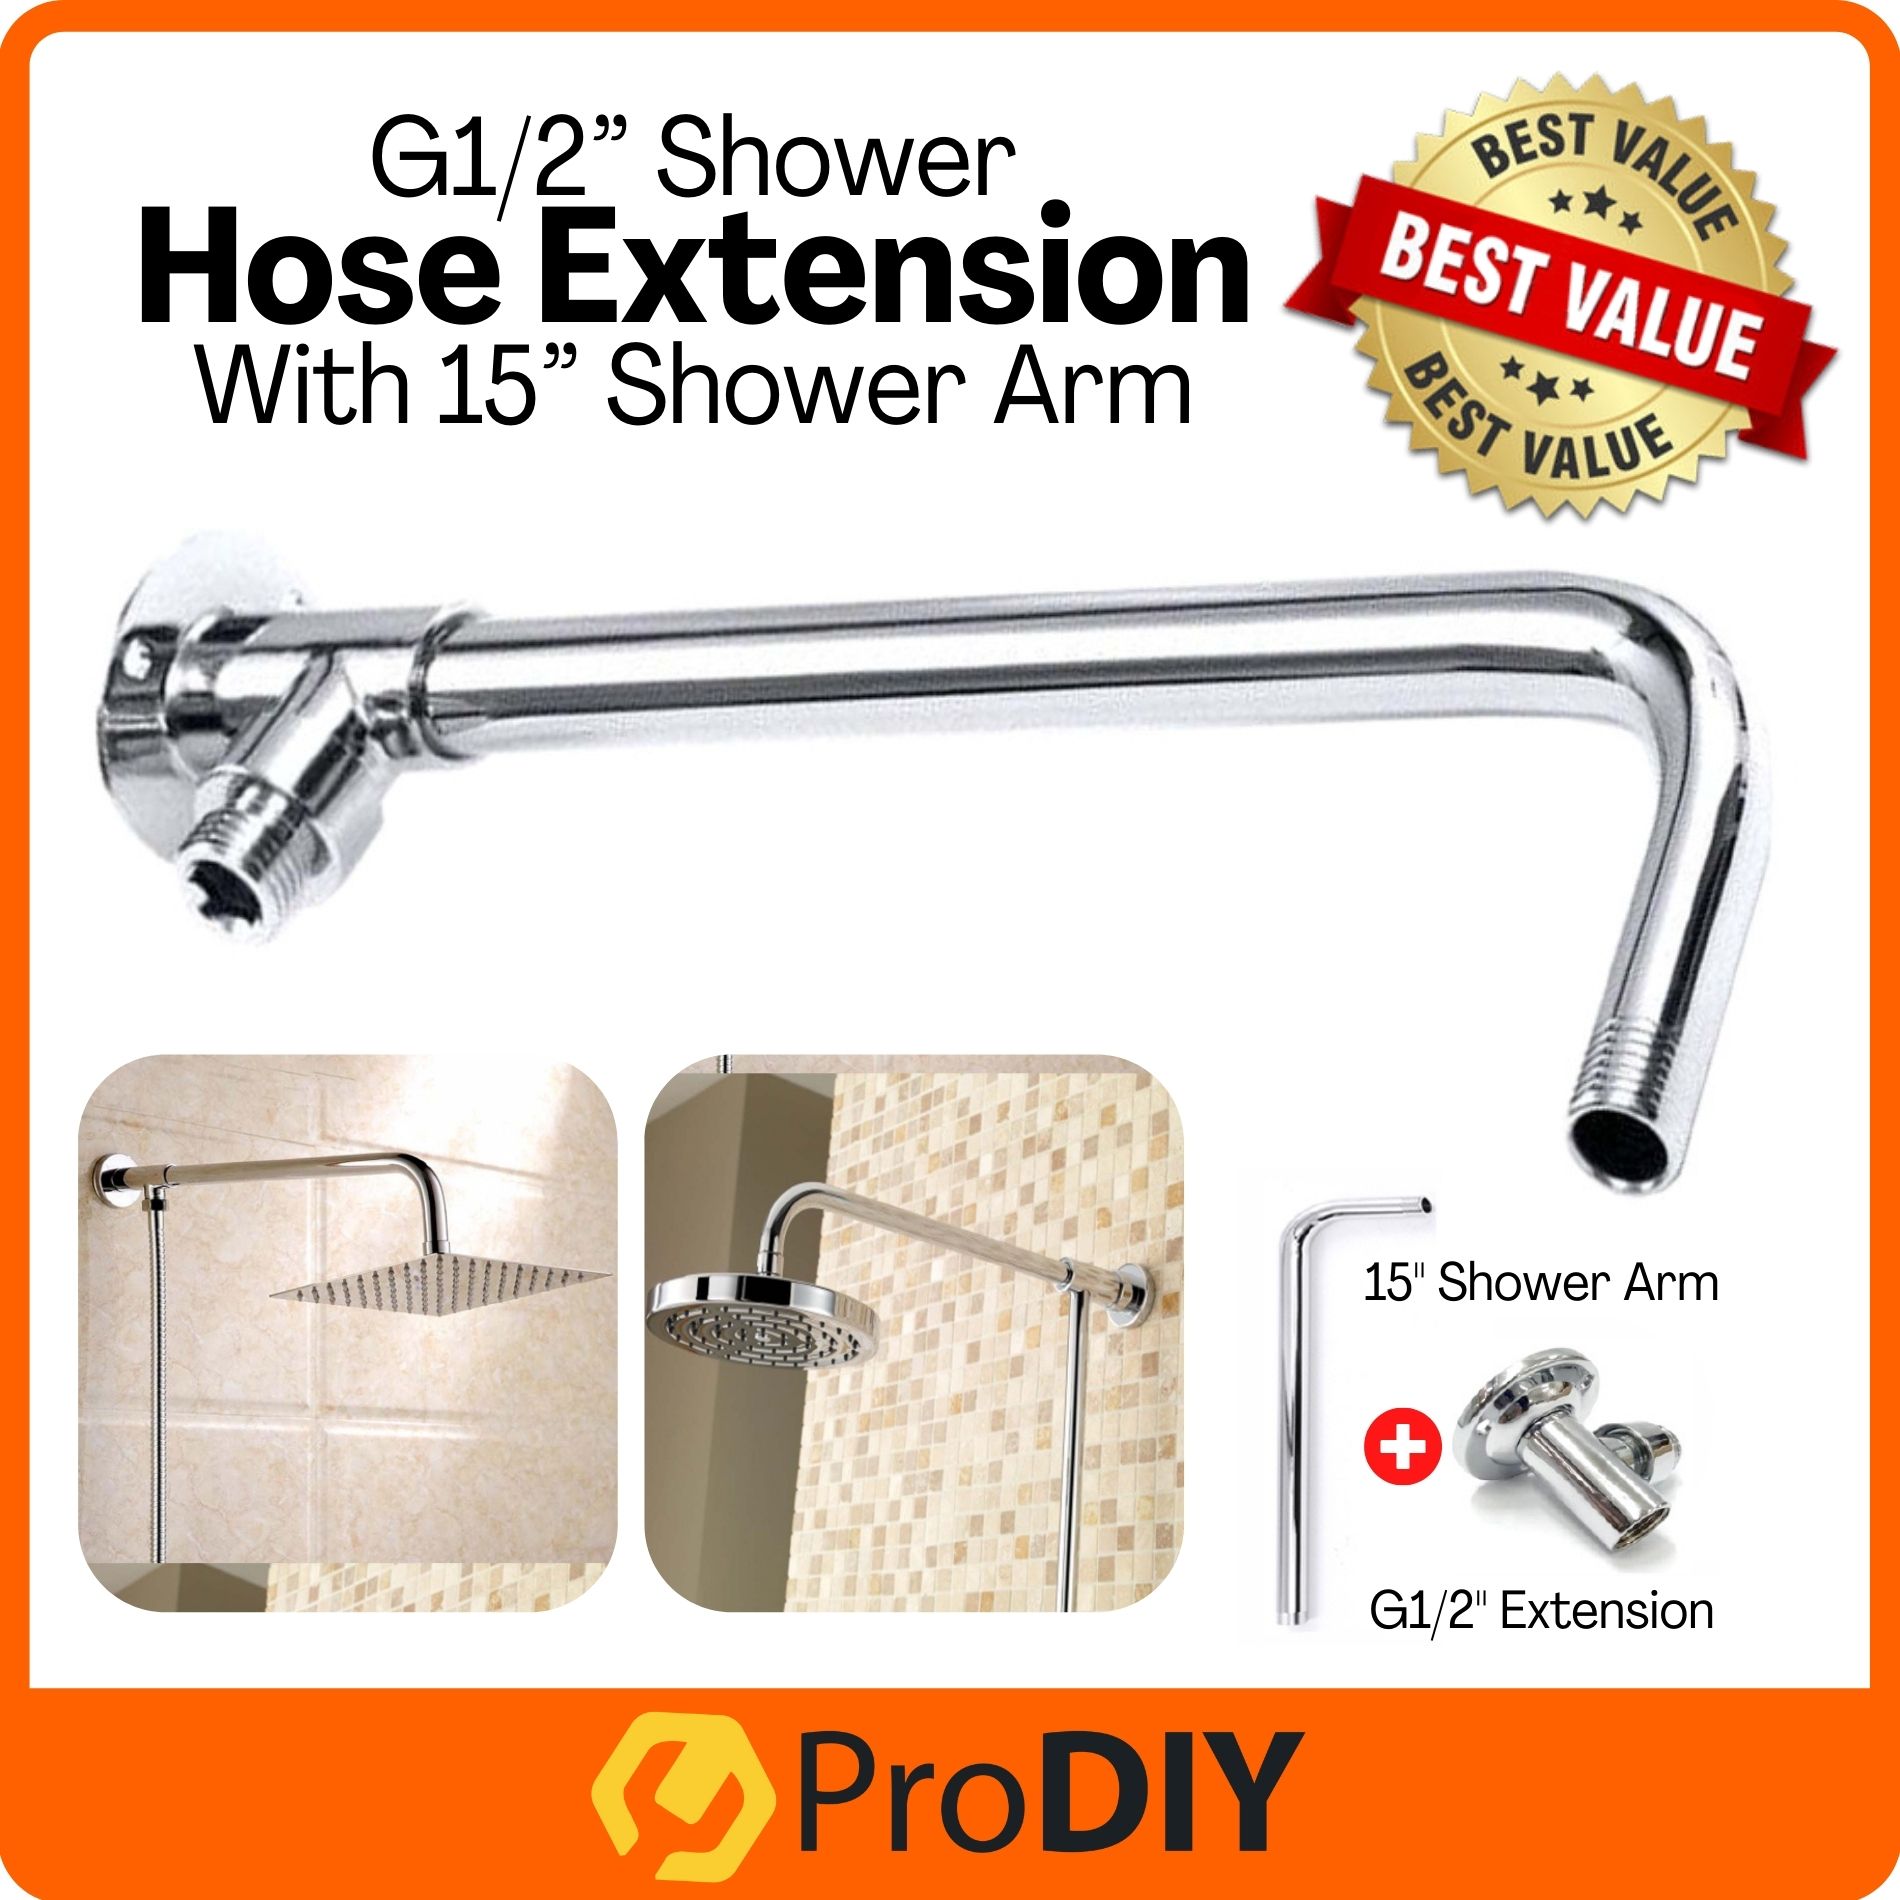 Stainless Steel G1/2” Shower Hose Extension Wall Mounted Bottom Entry Shower Extension With 15” Shower Arm ( FK-201545 )